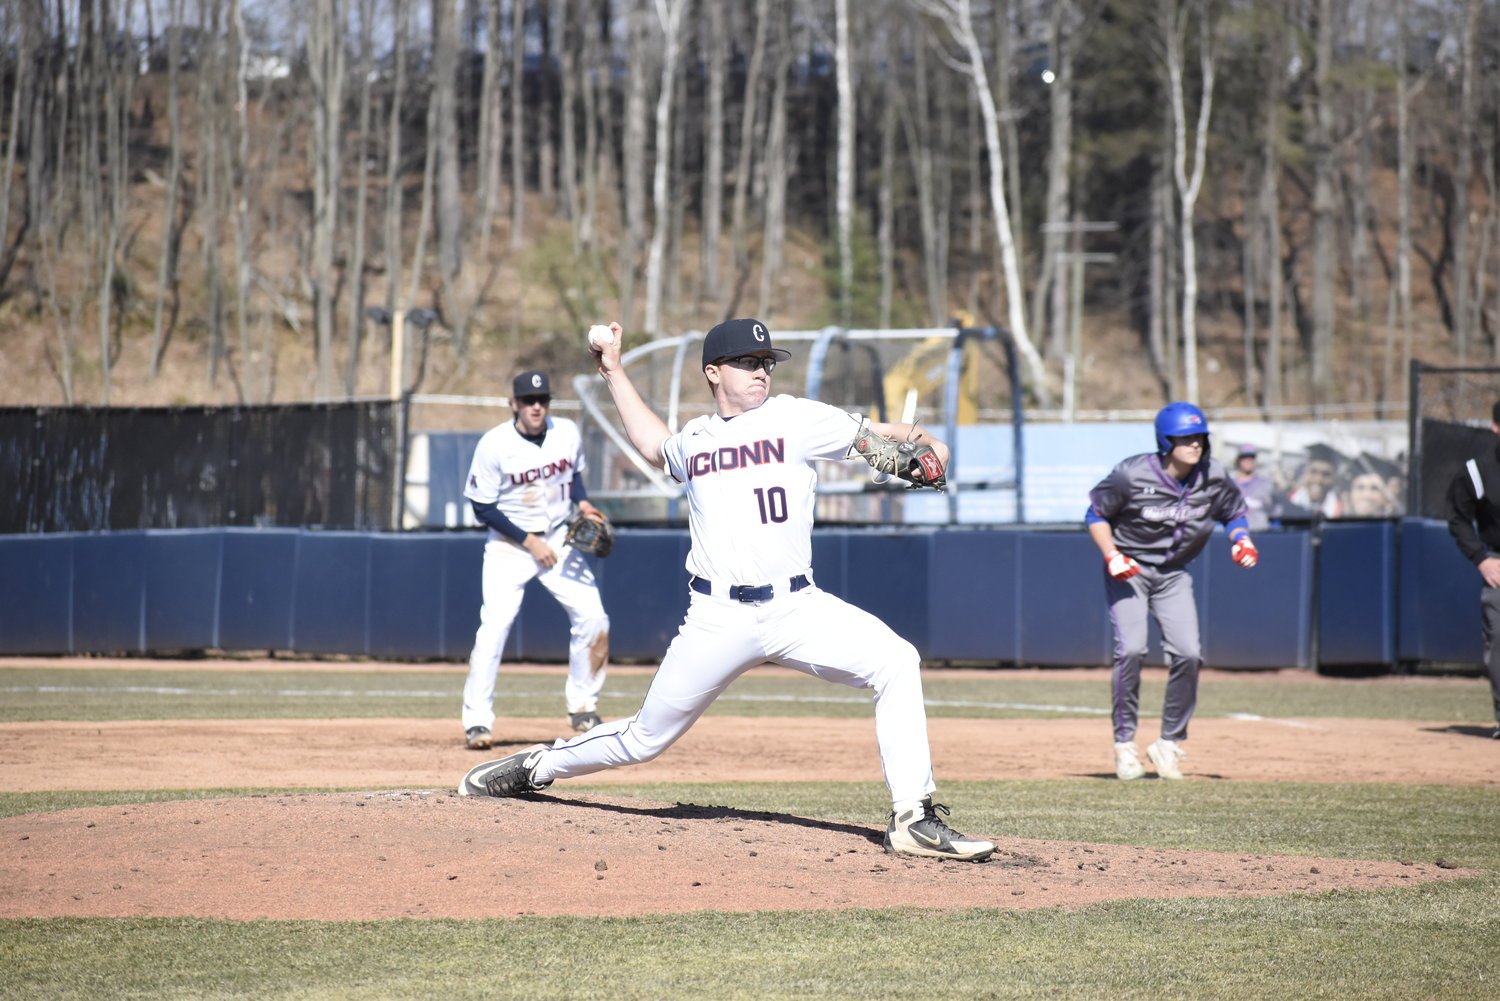 UConn baseball bounces back with an 11-6 win over Bryant — The Daily Campus